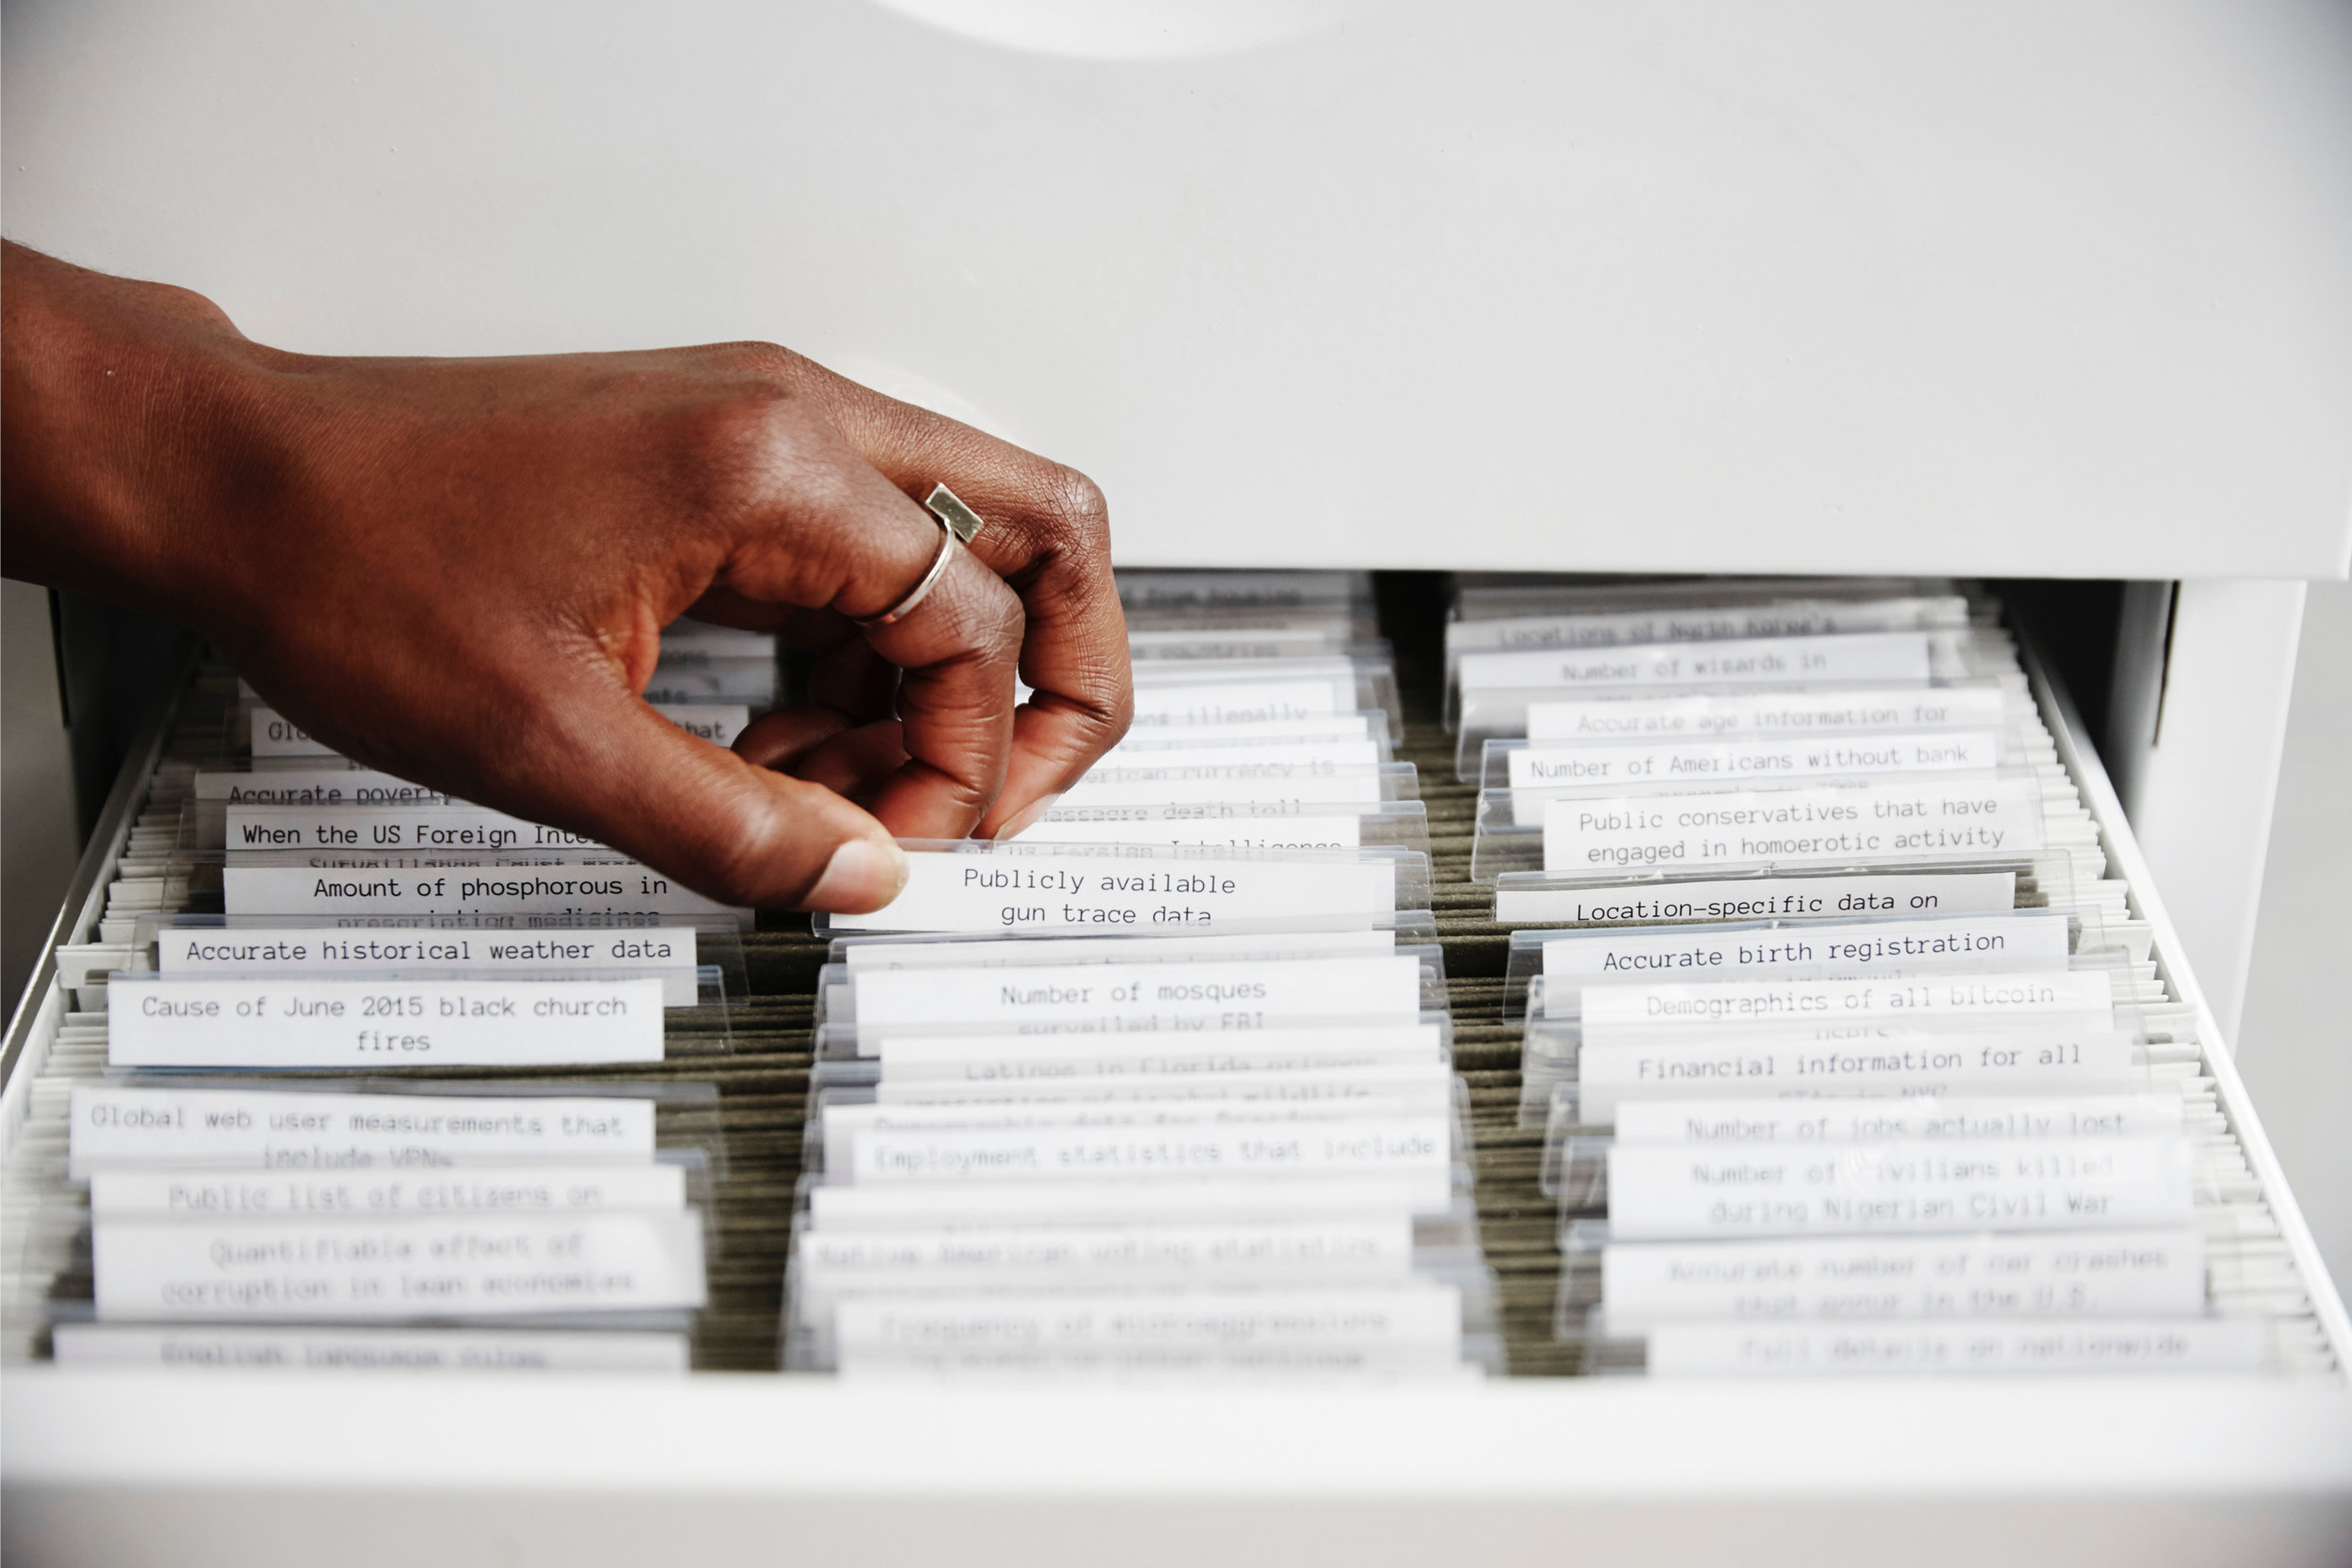 A feminine hand with darker skin reaches into a filing cabinet with many files inside, each with tabbed labels. The hand is reaching for “Publicaly available gun trace data”. The image is from MIMI ỌNỤỌHA’s website and is of ‘The Library of Missing Datasets’ (2016)